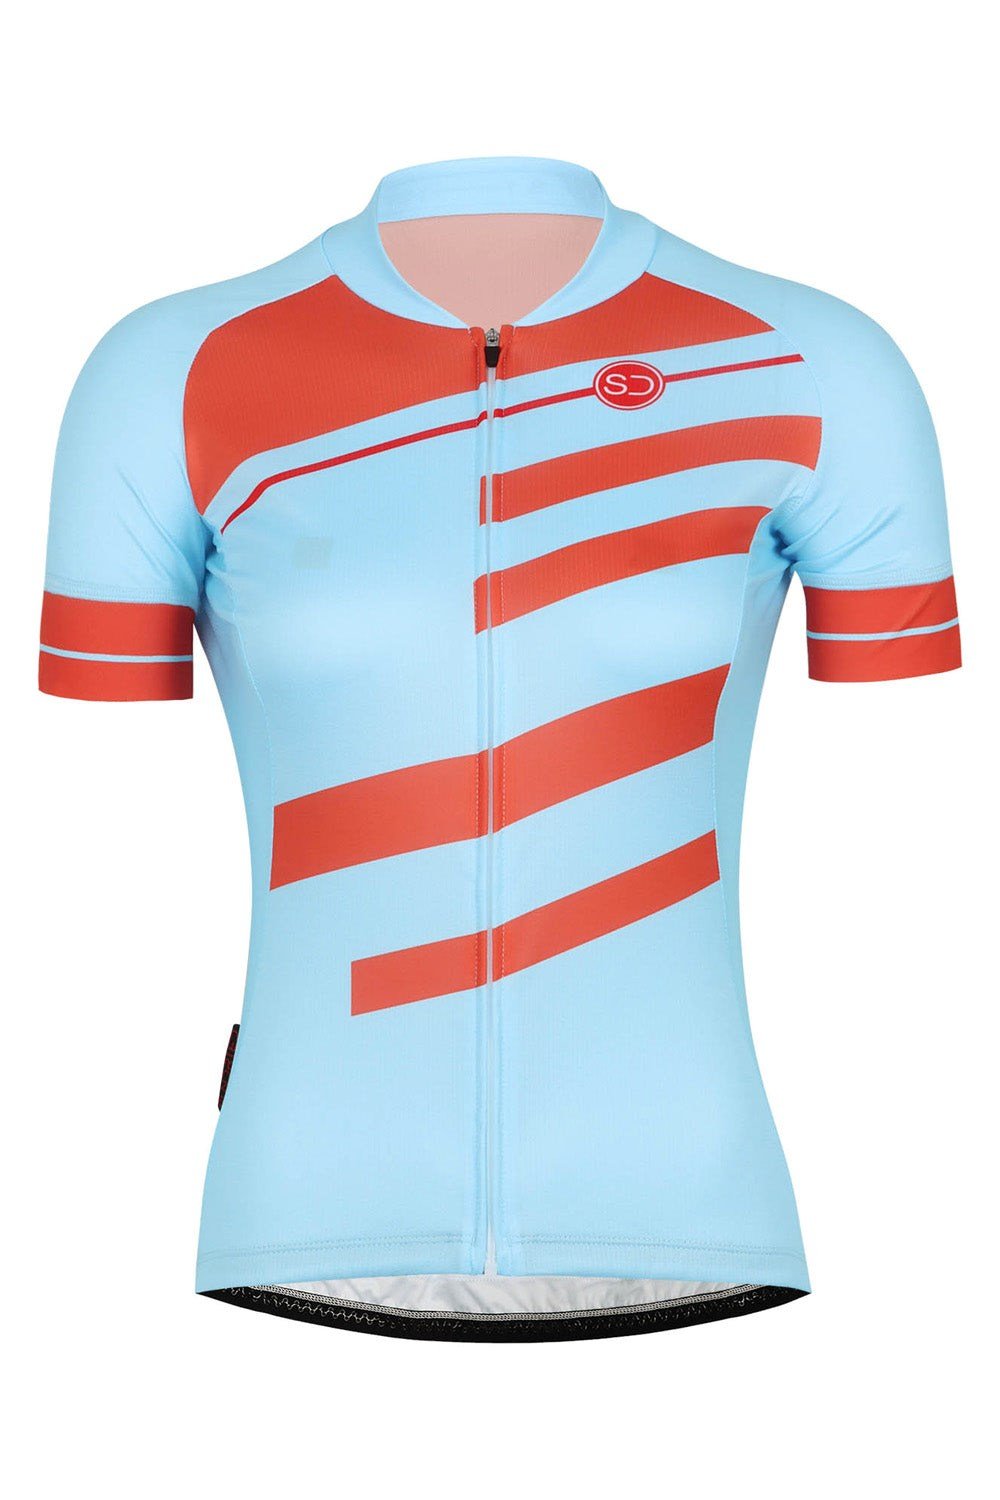 Ecrins Womens Cycle Jersey -